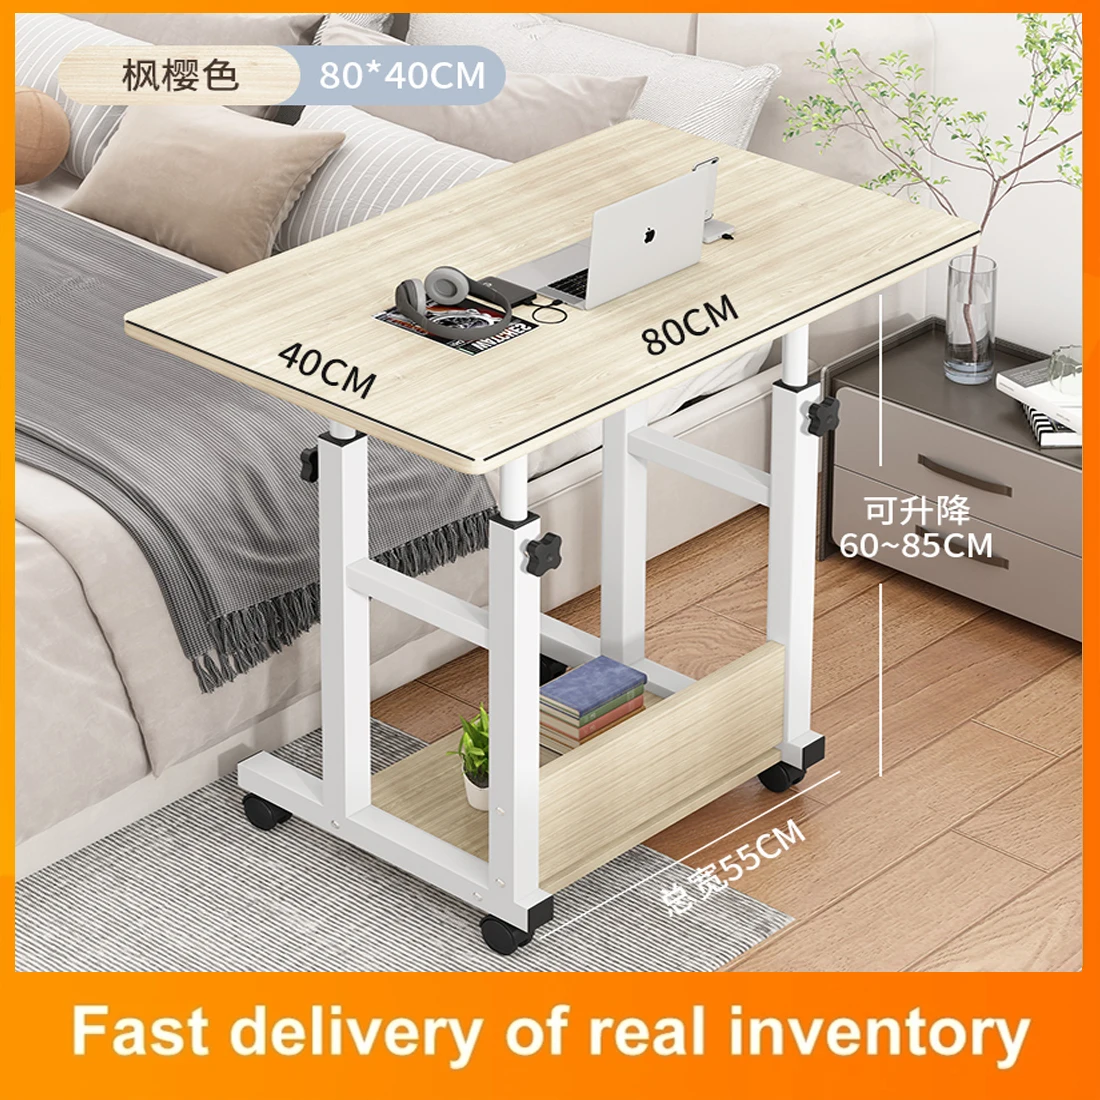 

Computer Desk Lazy Person Bedside Table Desktop Household Minimalist Desk Dormitory Simple Bed Small Table Movable